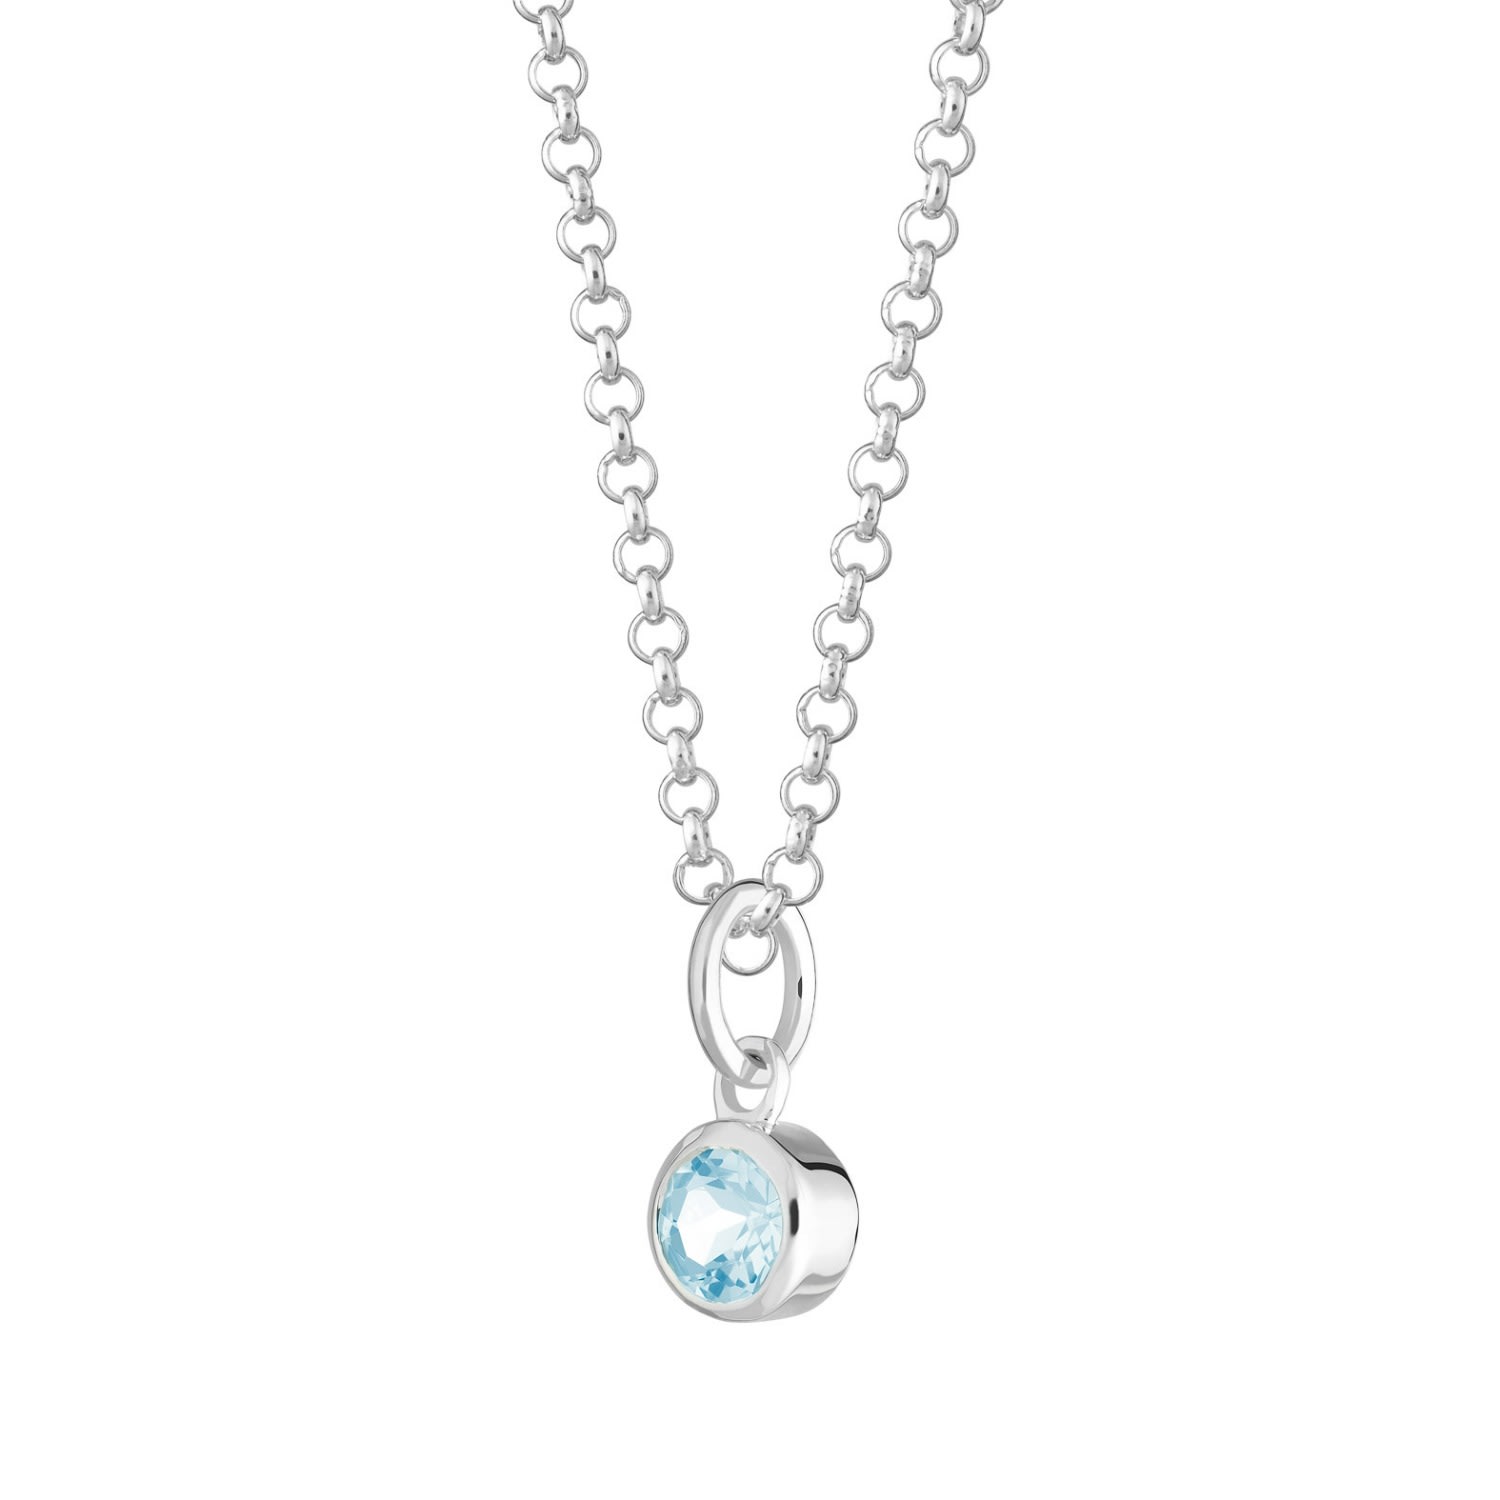 Women's Sterling Silver March Birthstone Necklace - Aquamarine Lily Charmed